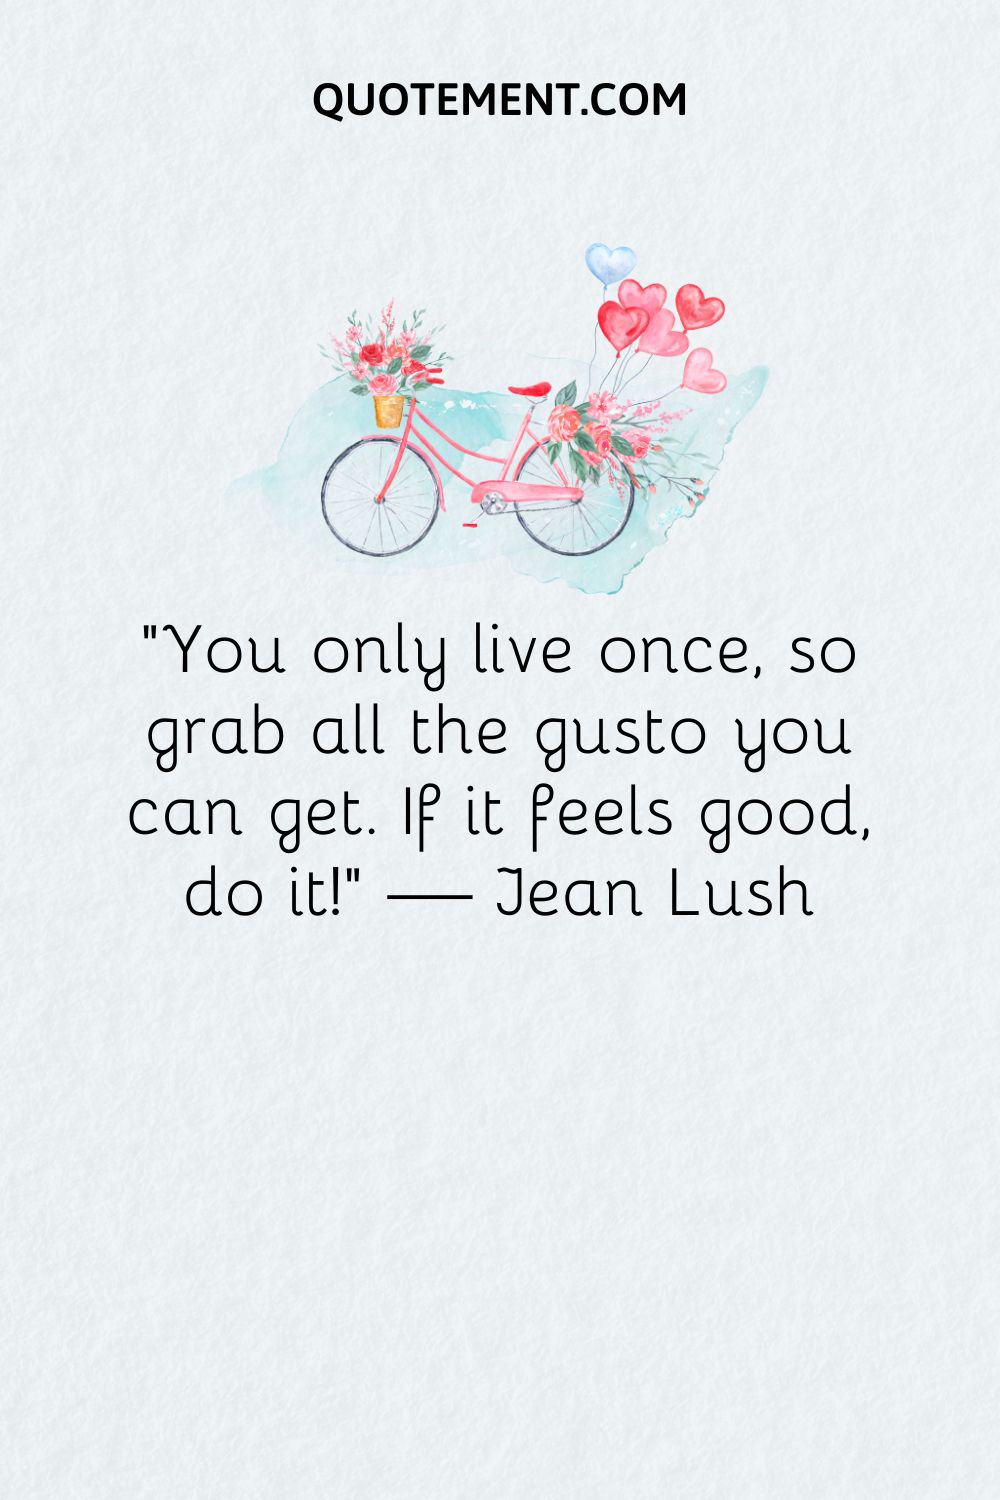 “You only live once, so grab all the gusto you can get. If it feels good, do it!” — Jean Lush